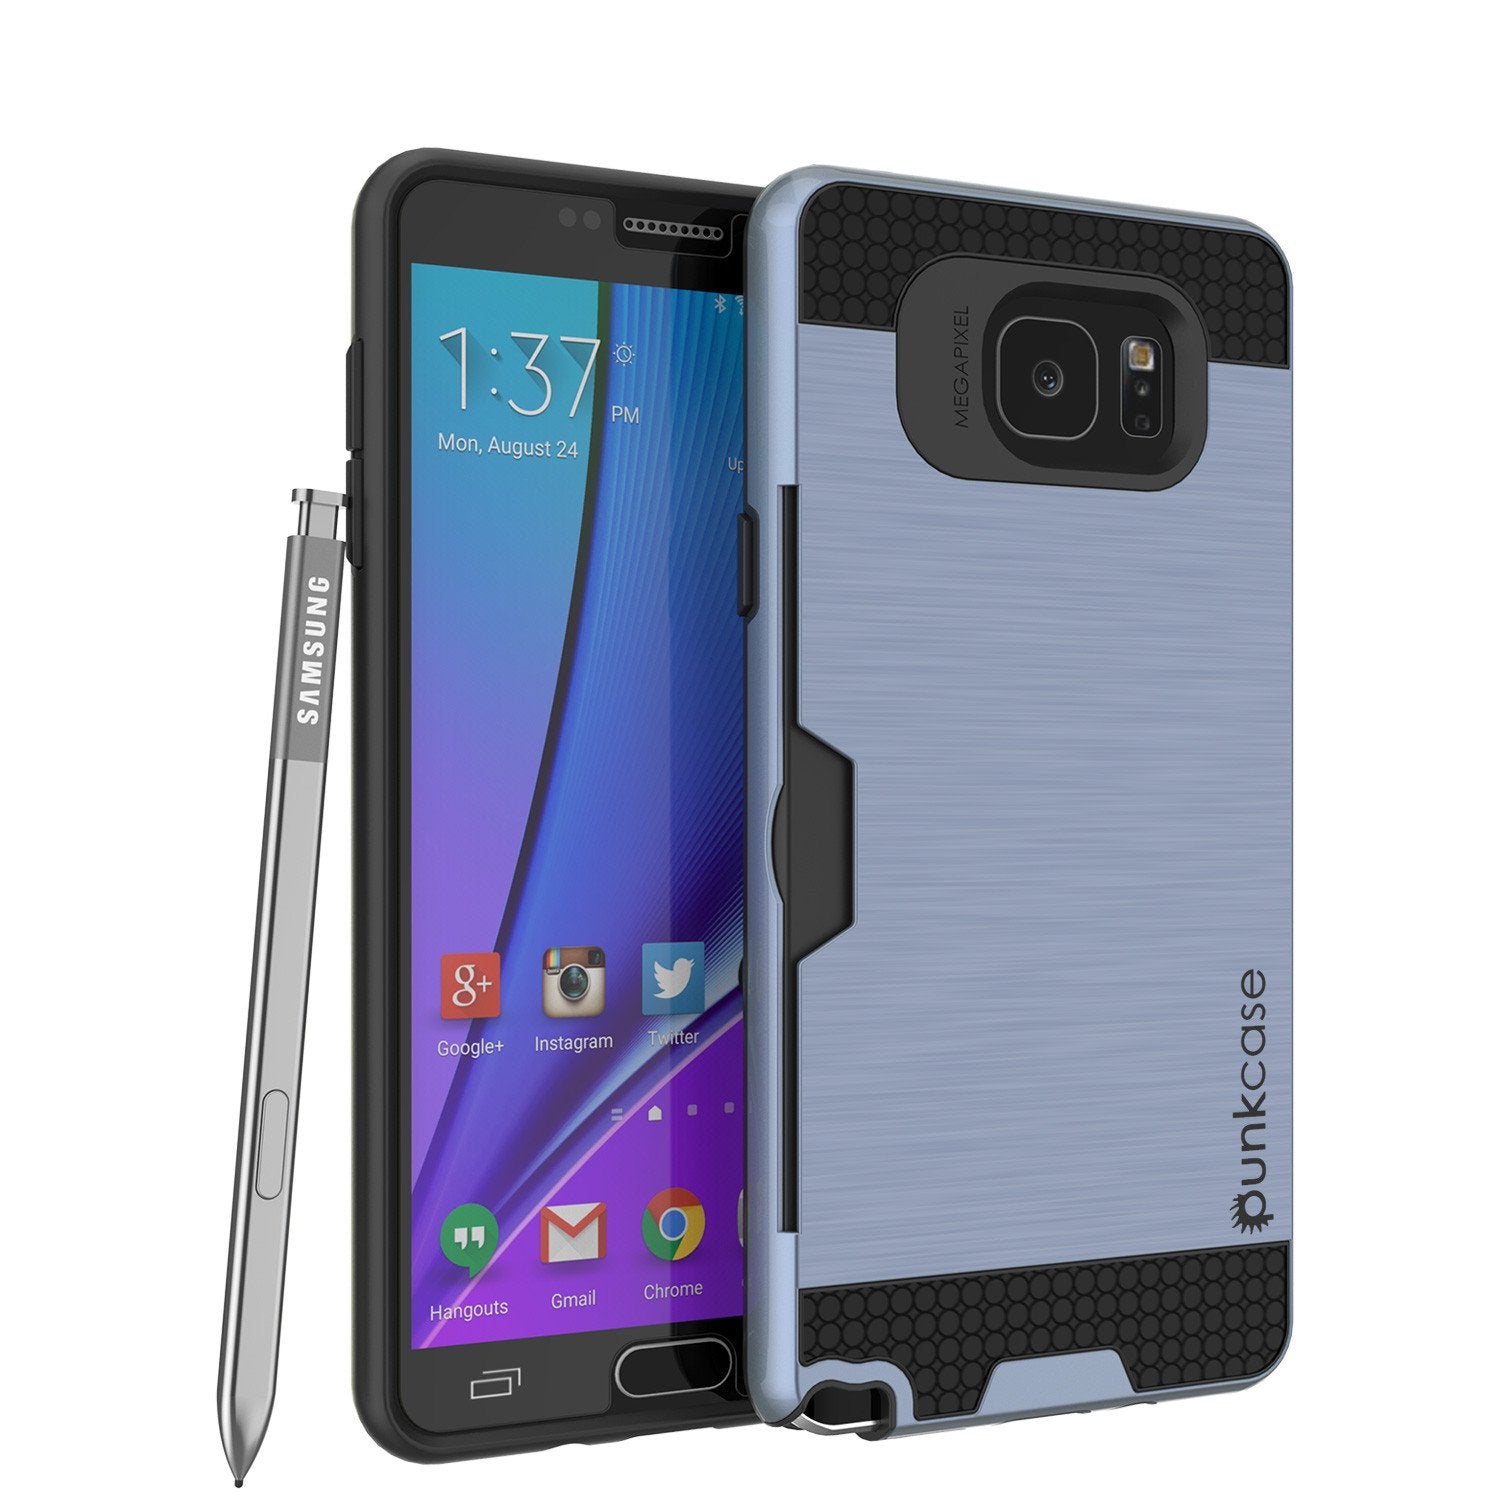 Galaxy Note 5 Case PunkCase SLOT Navy Series Slim Armor Soft Cover Case w/ Tempered Glass